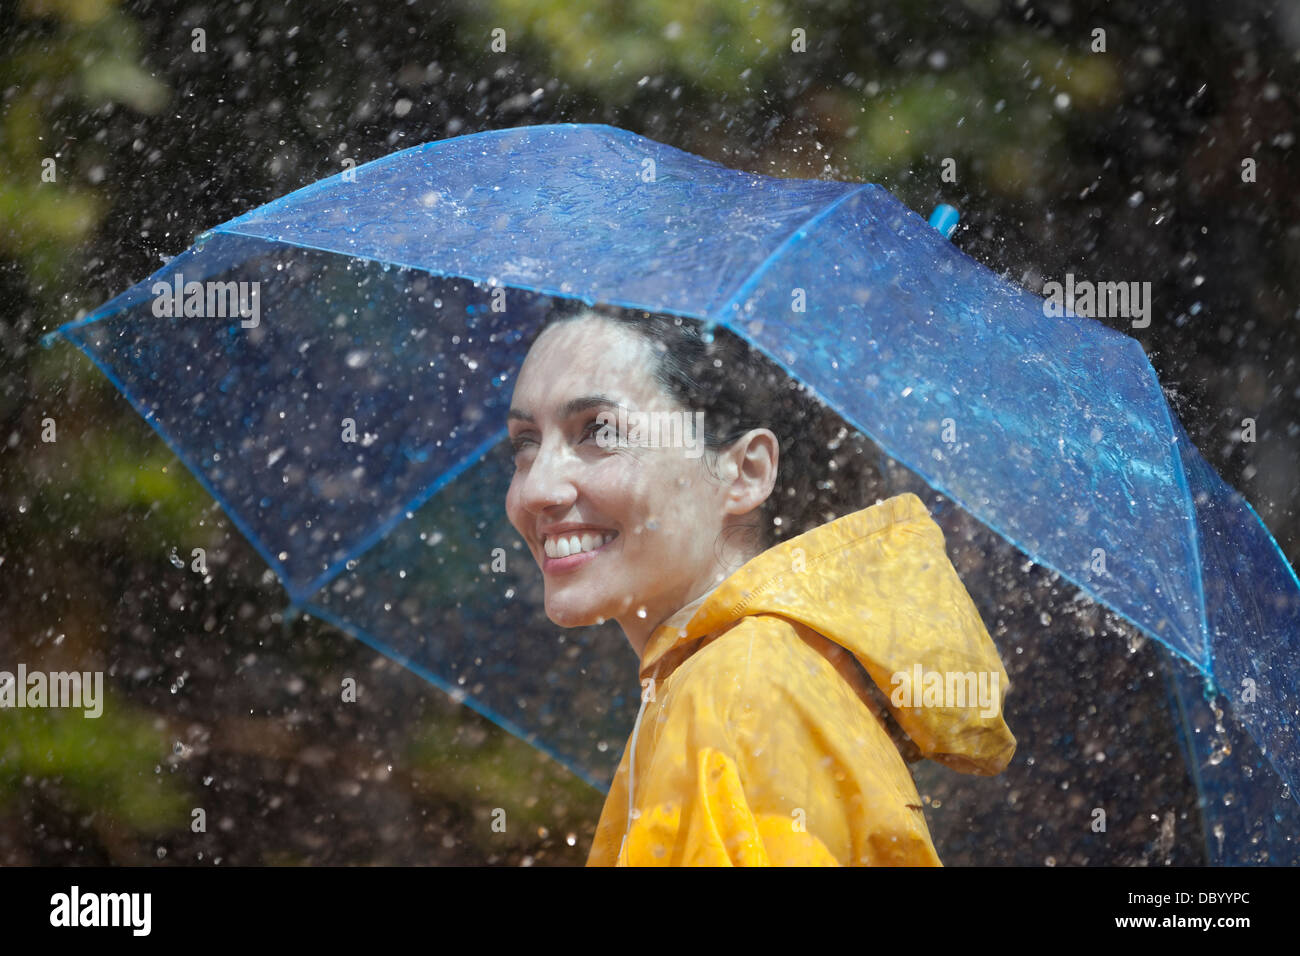 Happy woman with umbrella in rain Banque D'Images